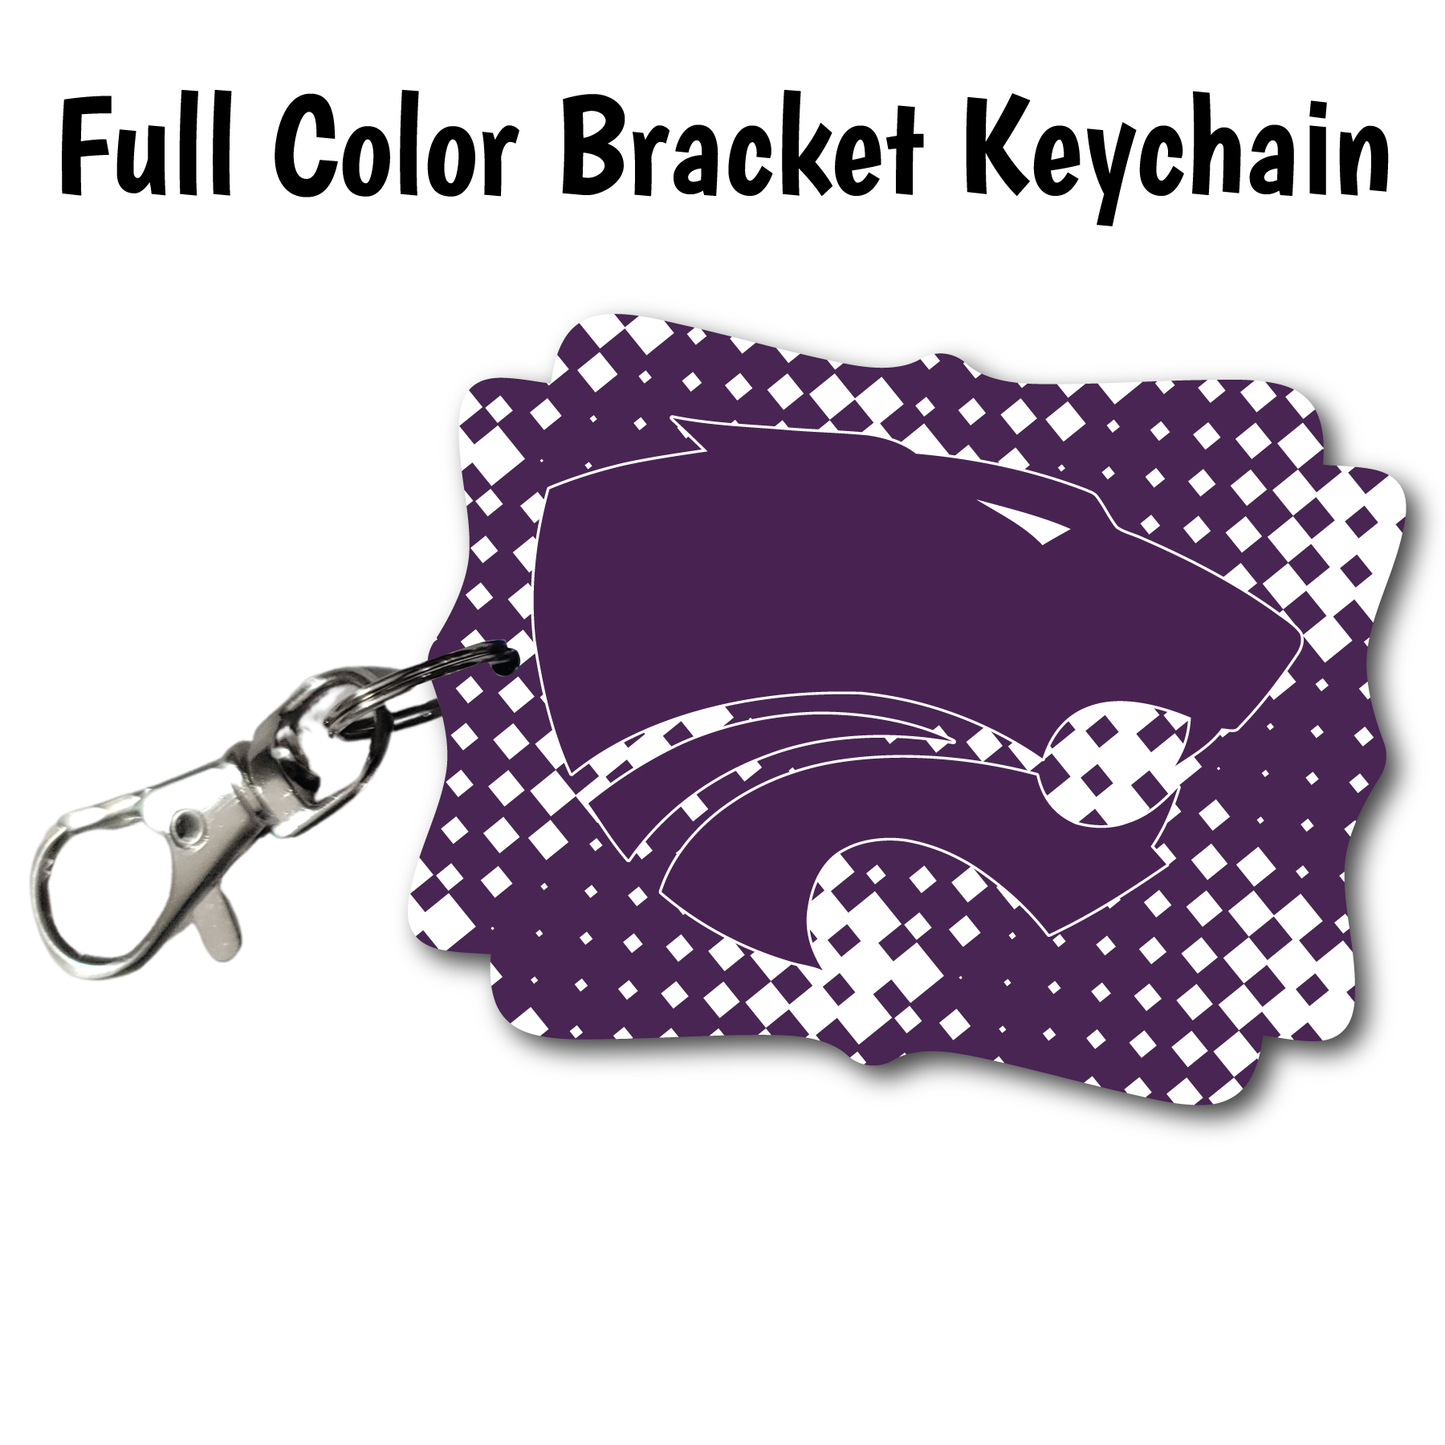 Snake River Panthers - Full Color Keychains